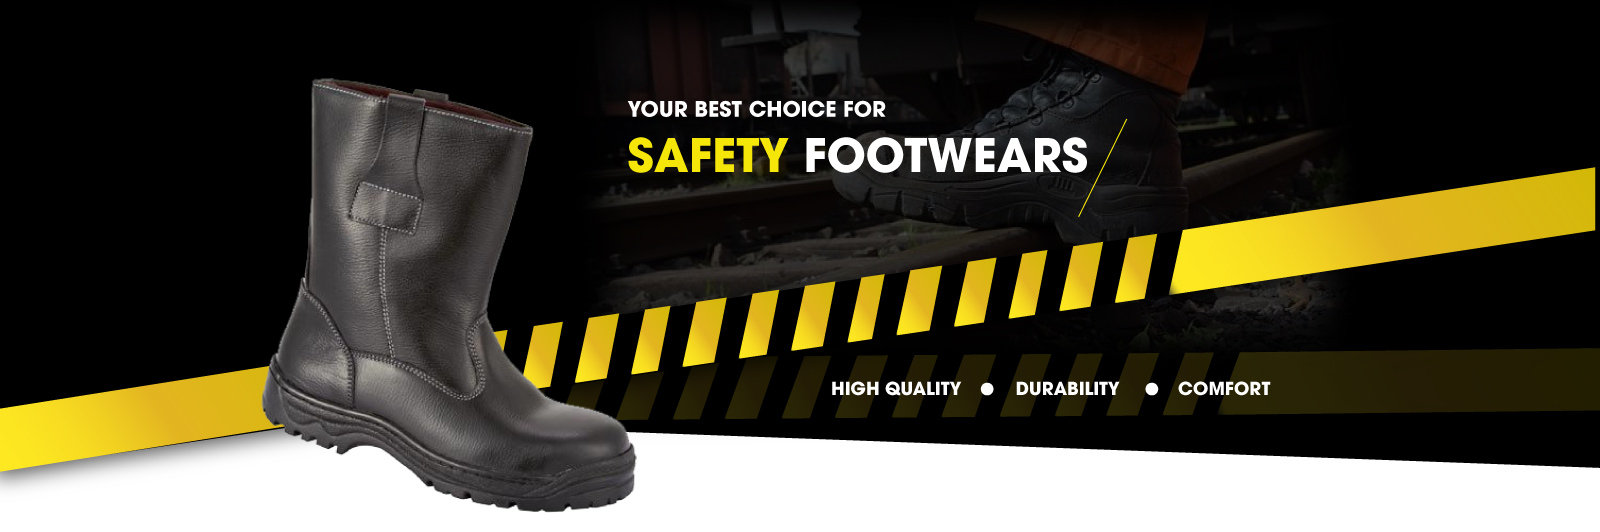 Safety Shoes Supplier & Manufacturer in Malaysia, Fosser Safety ...